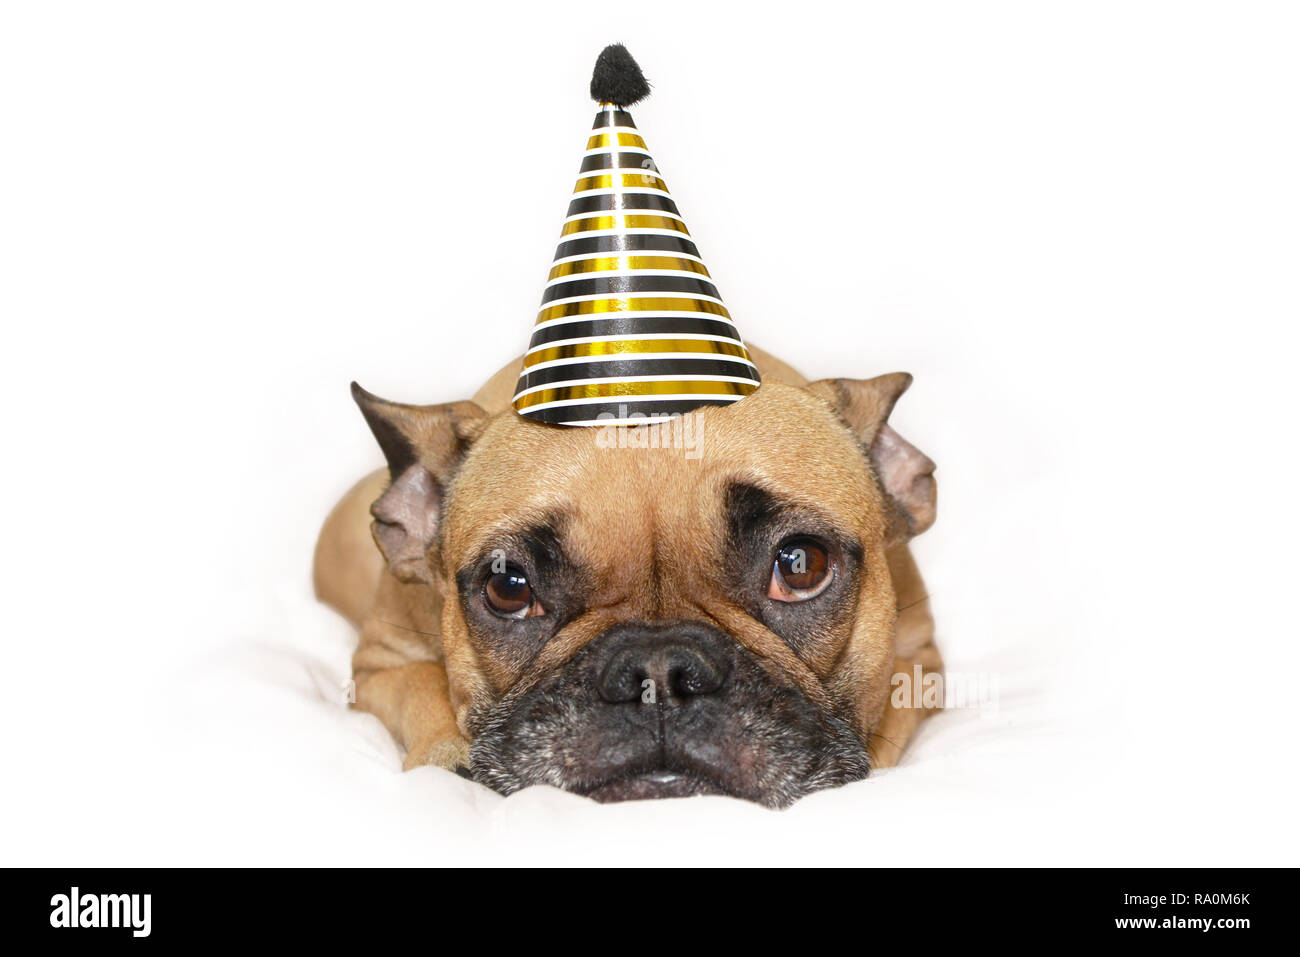 Cute small French Bulldog dog with gold and black new year party hat on head lying on white backgrund Stock Photo